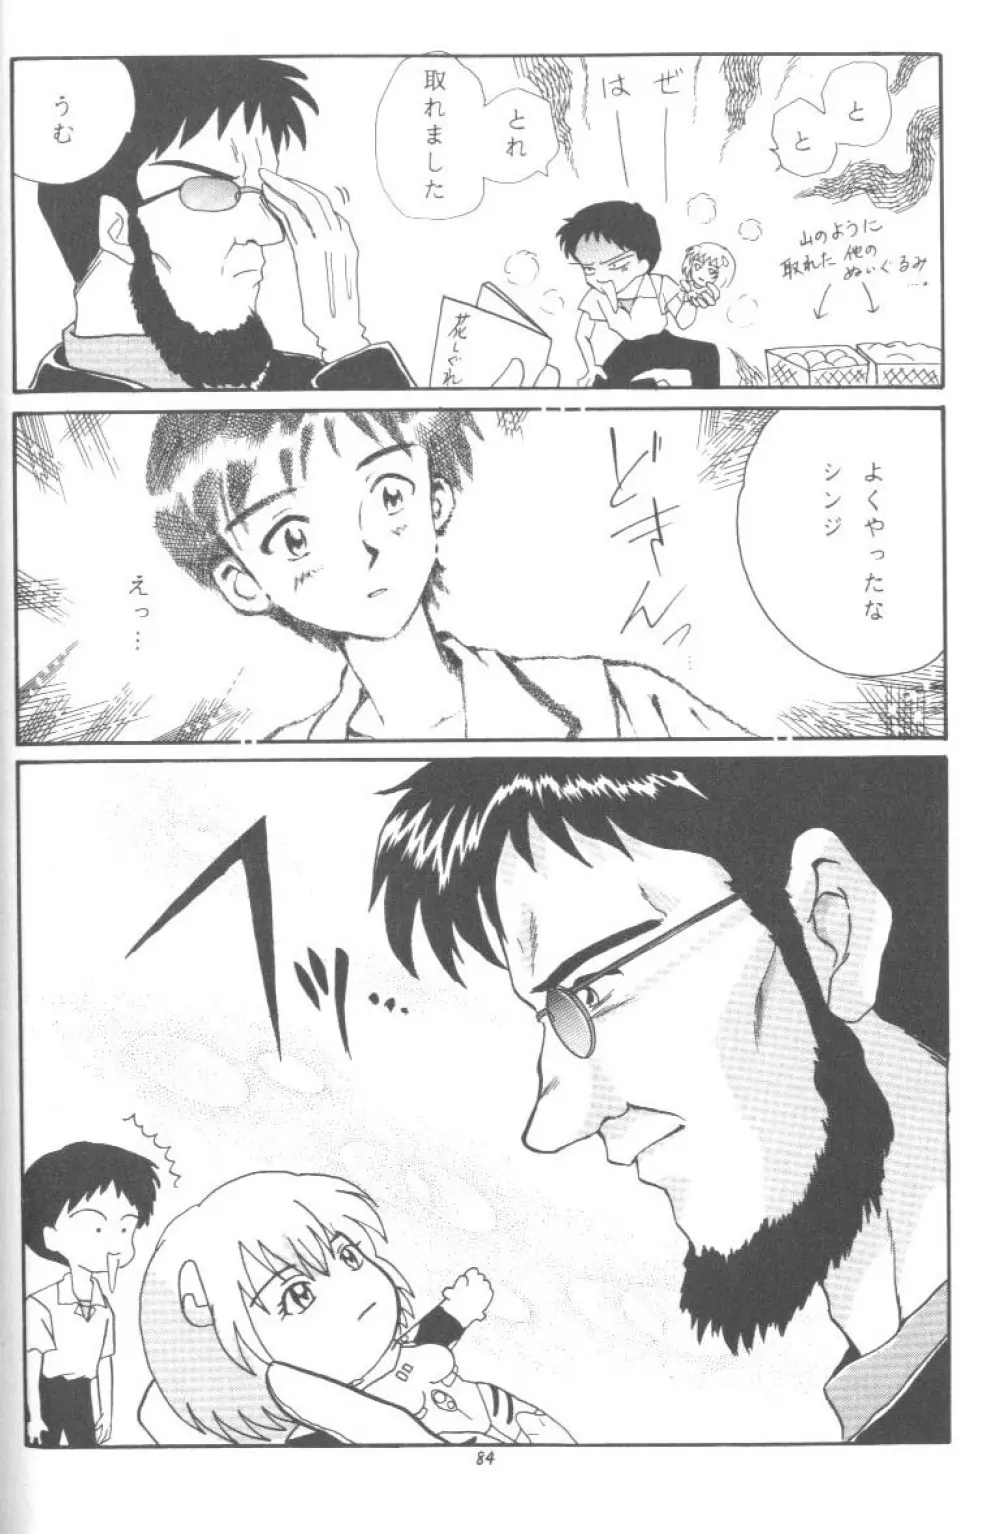 From The Neon Genesis 02 84ページ